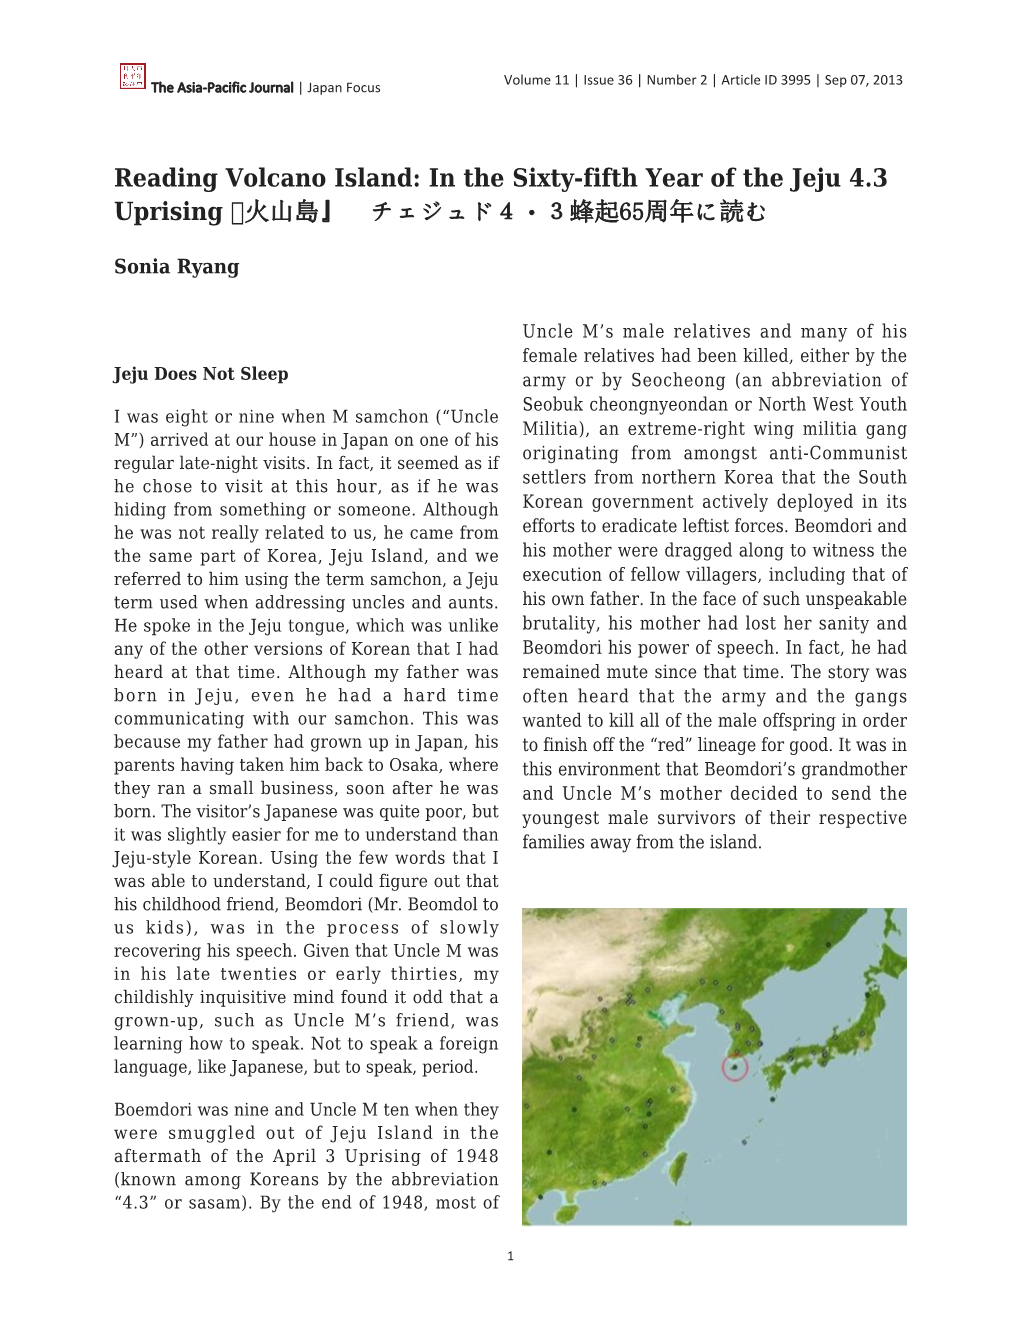 In the Sixty-Fifth Year of the Jeju 4.3 Uprising 『火山島』 チェジュド４・３蜂起65周年に読む